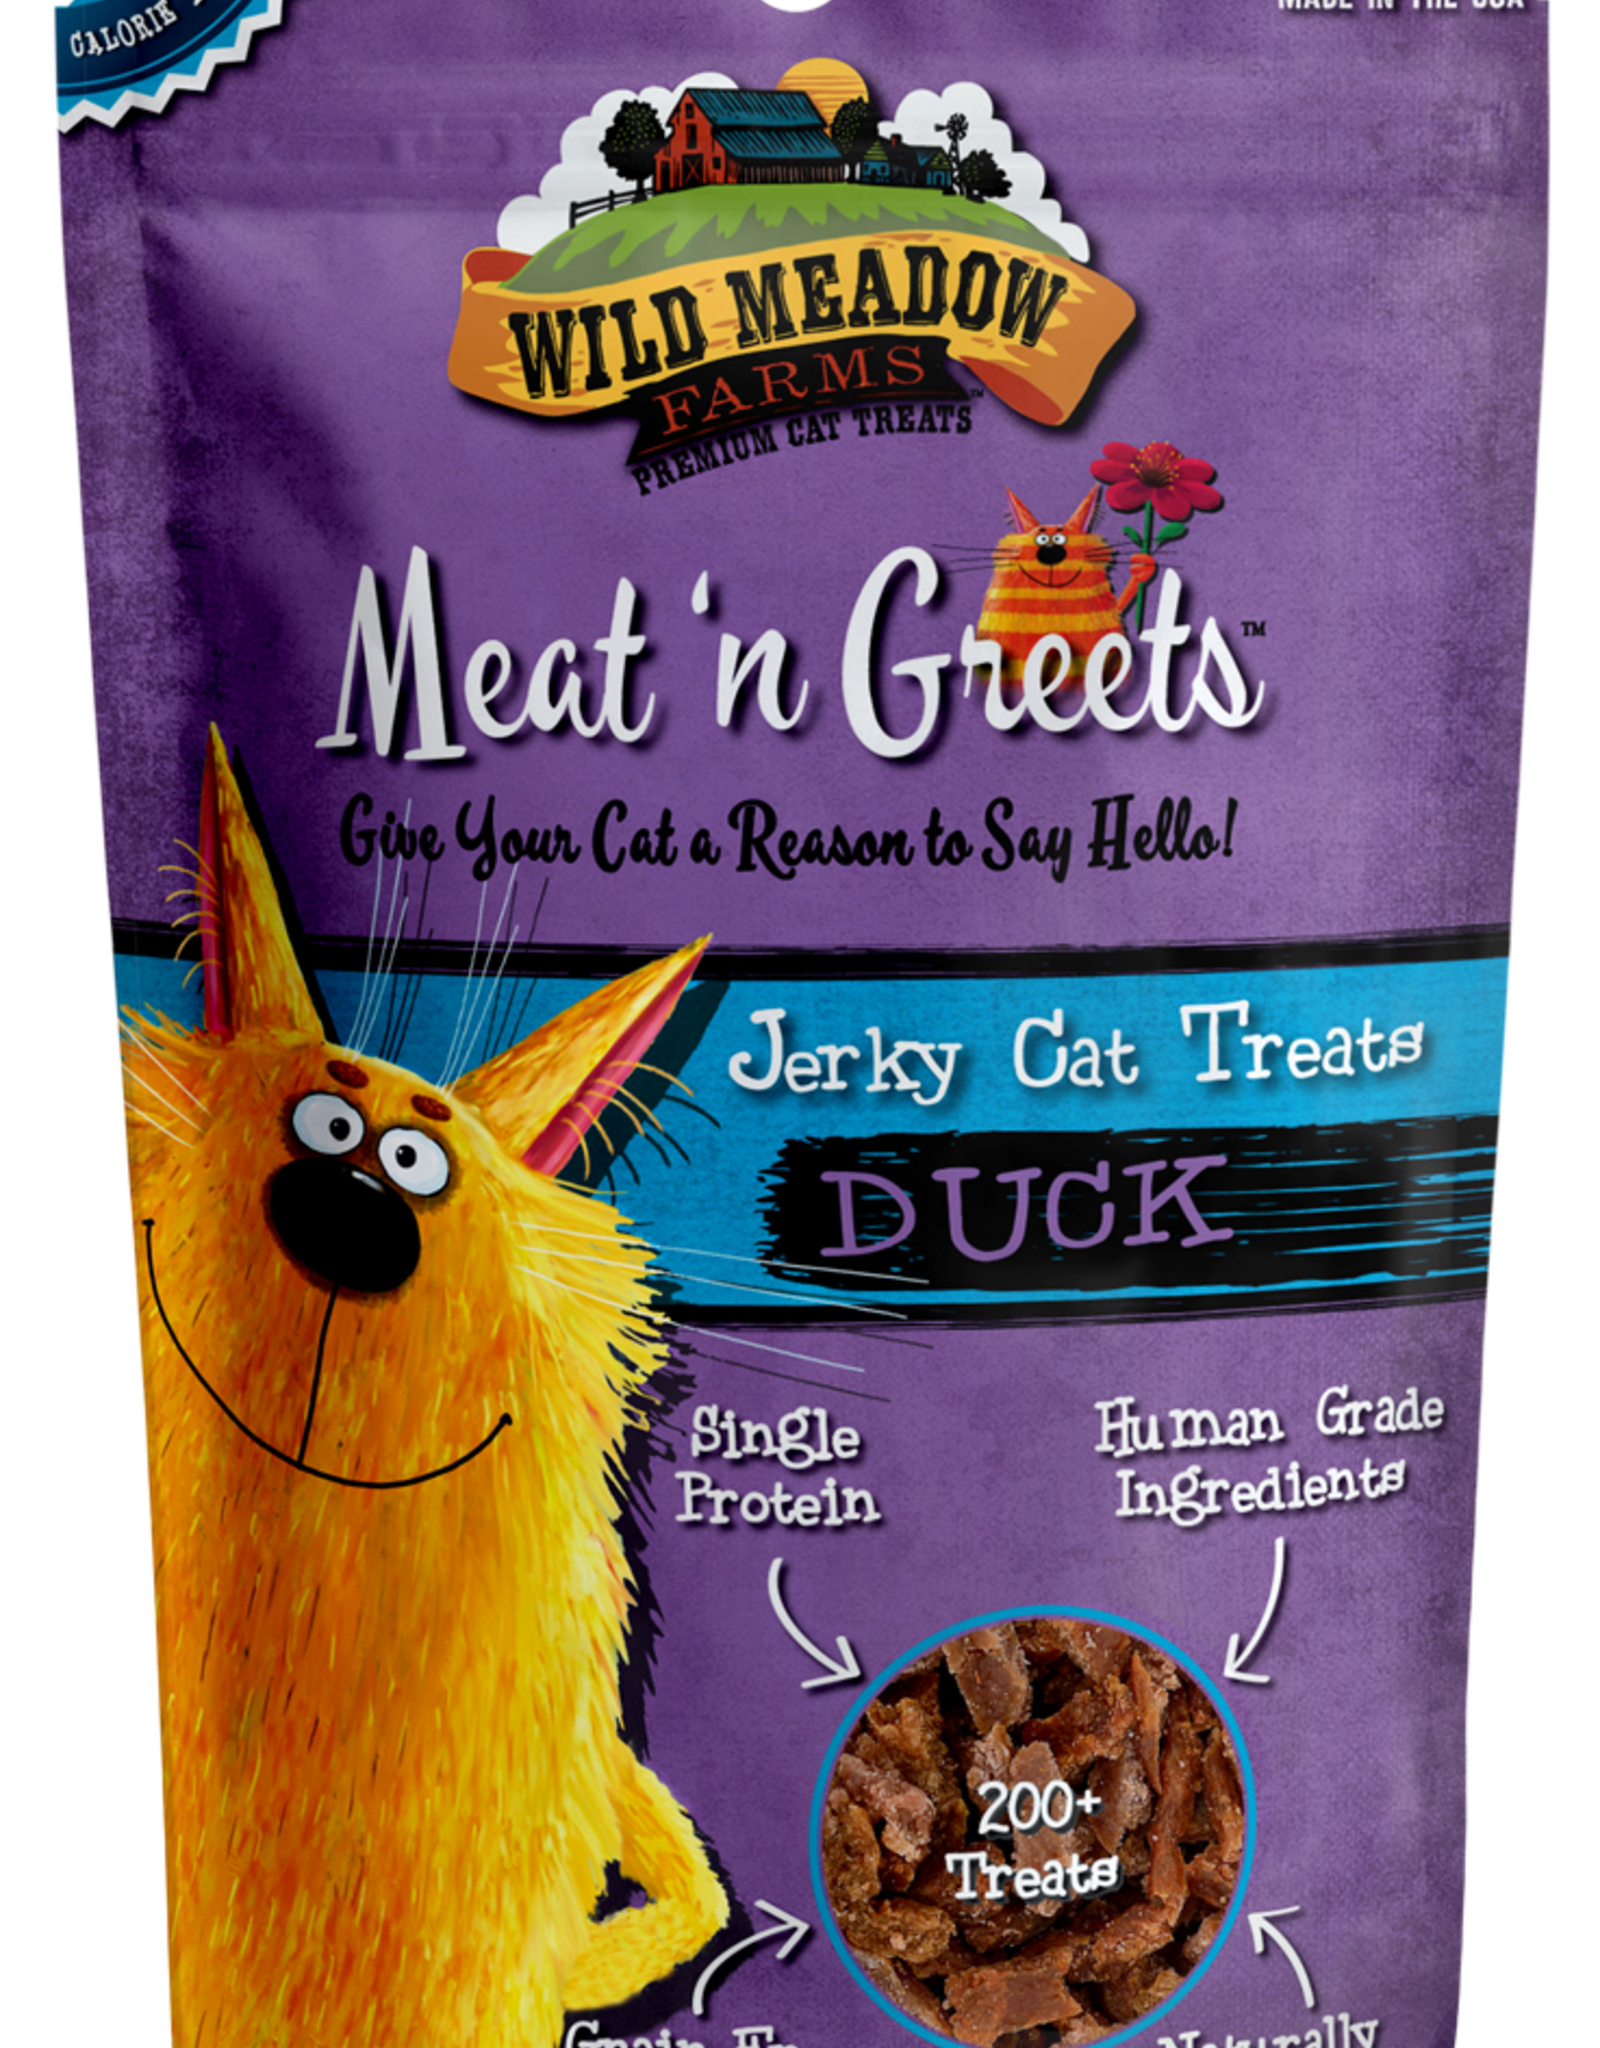 Wild Meadow Farms MeatNGreets Duck